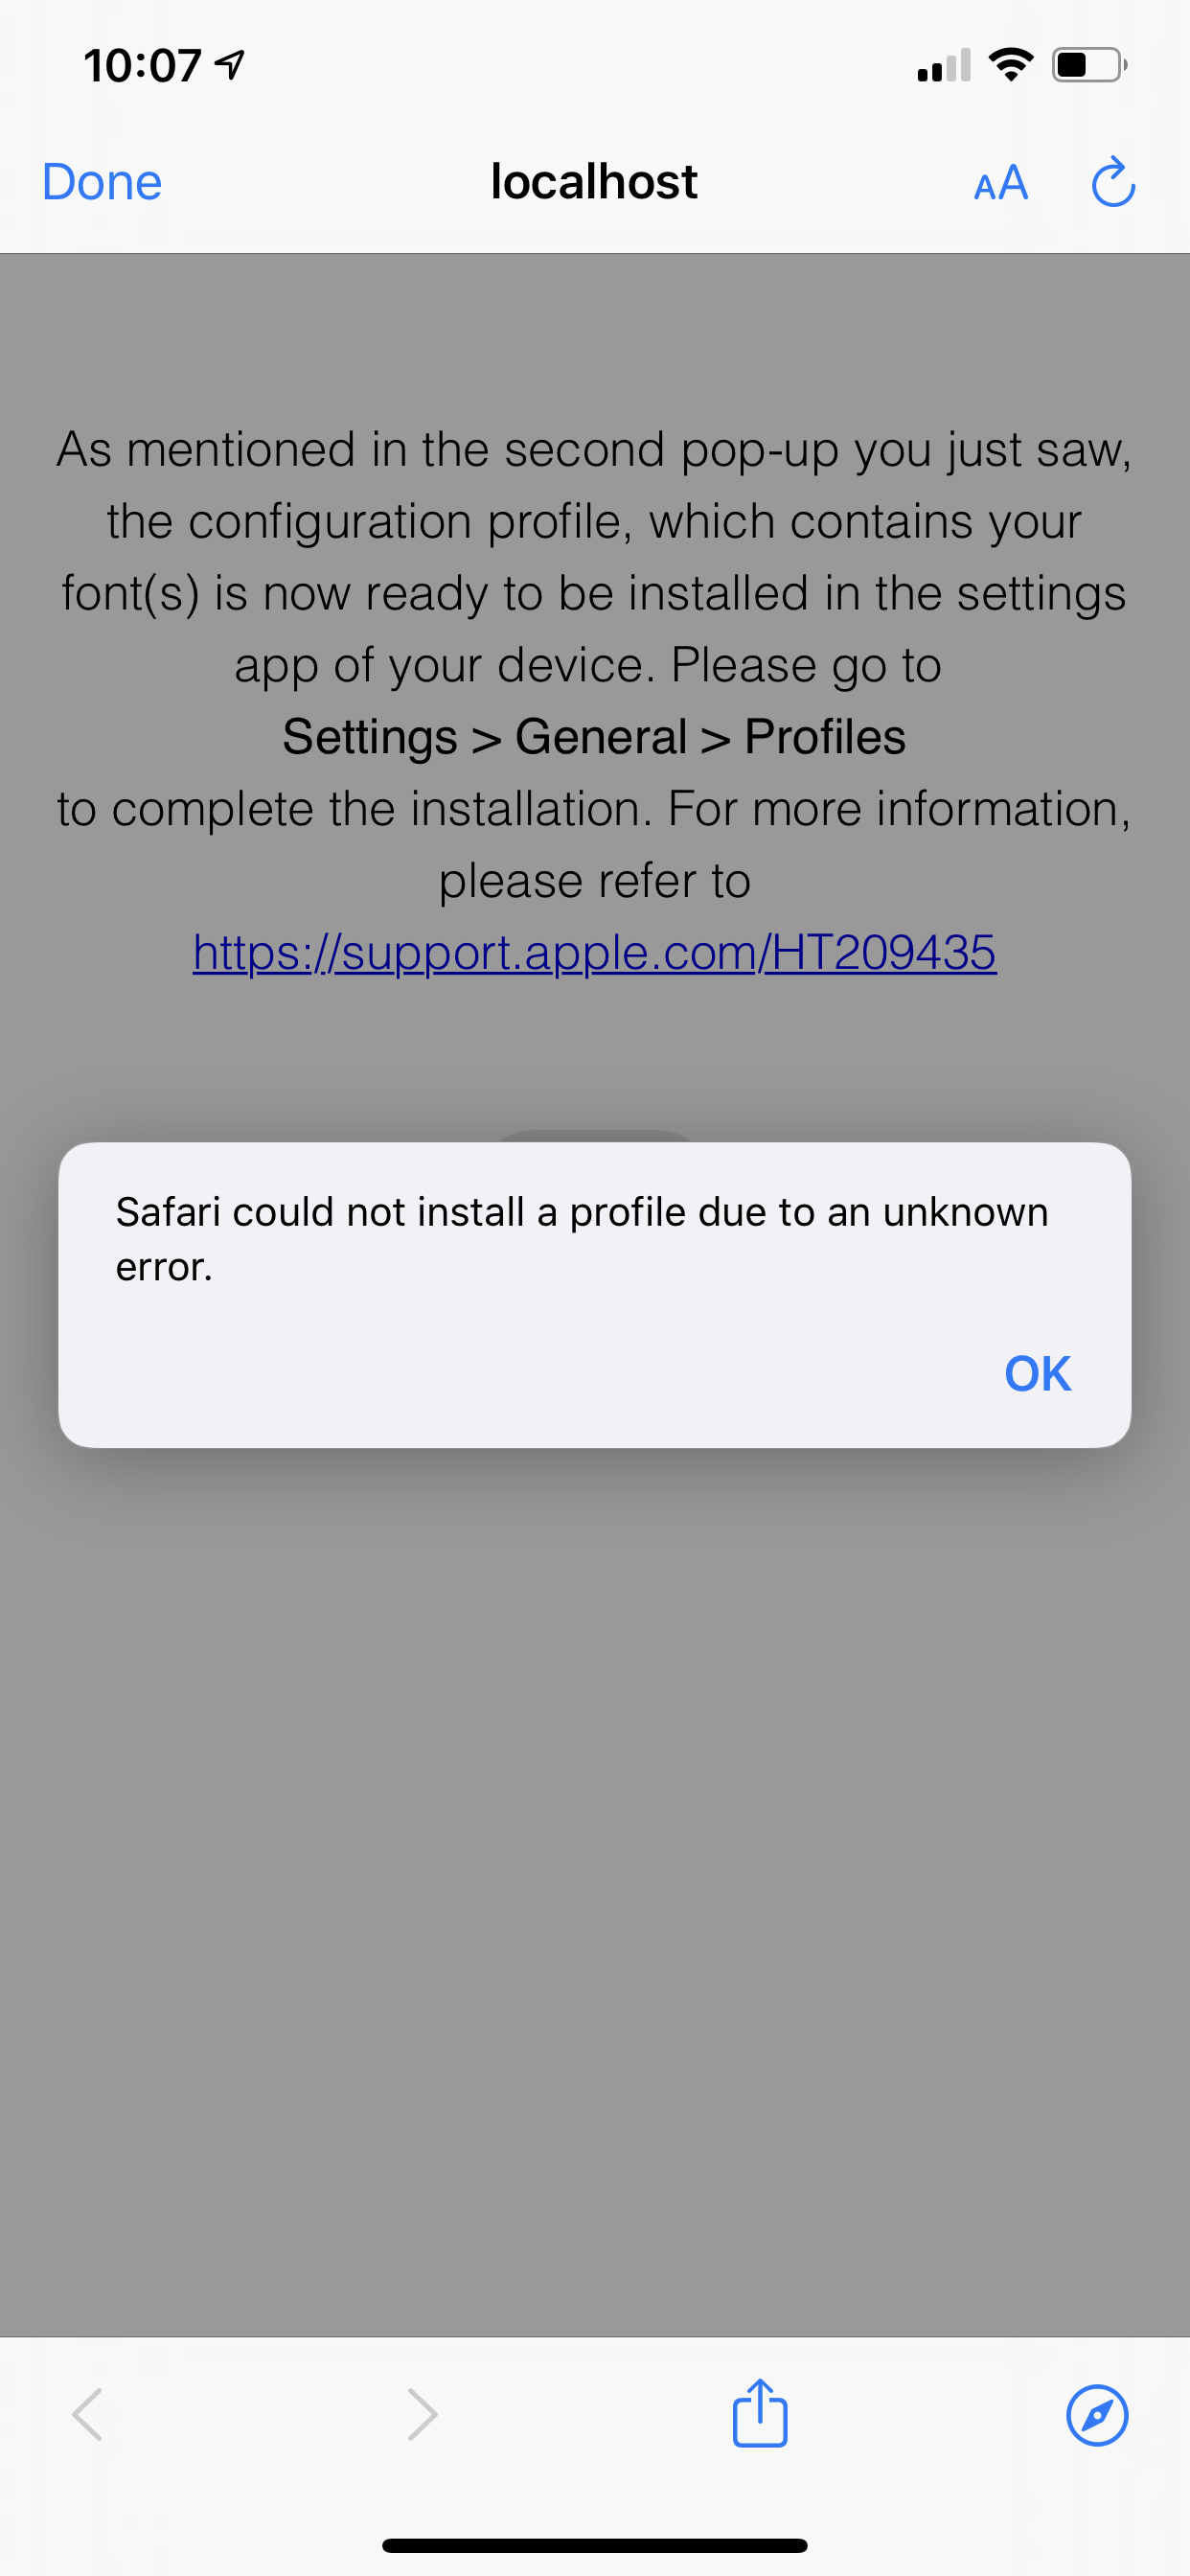 safari could not install a profile